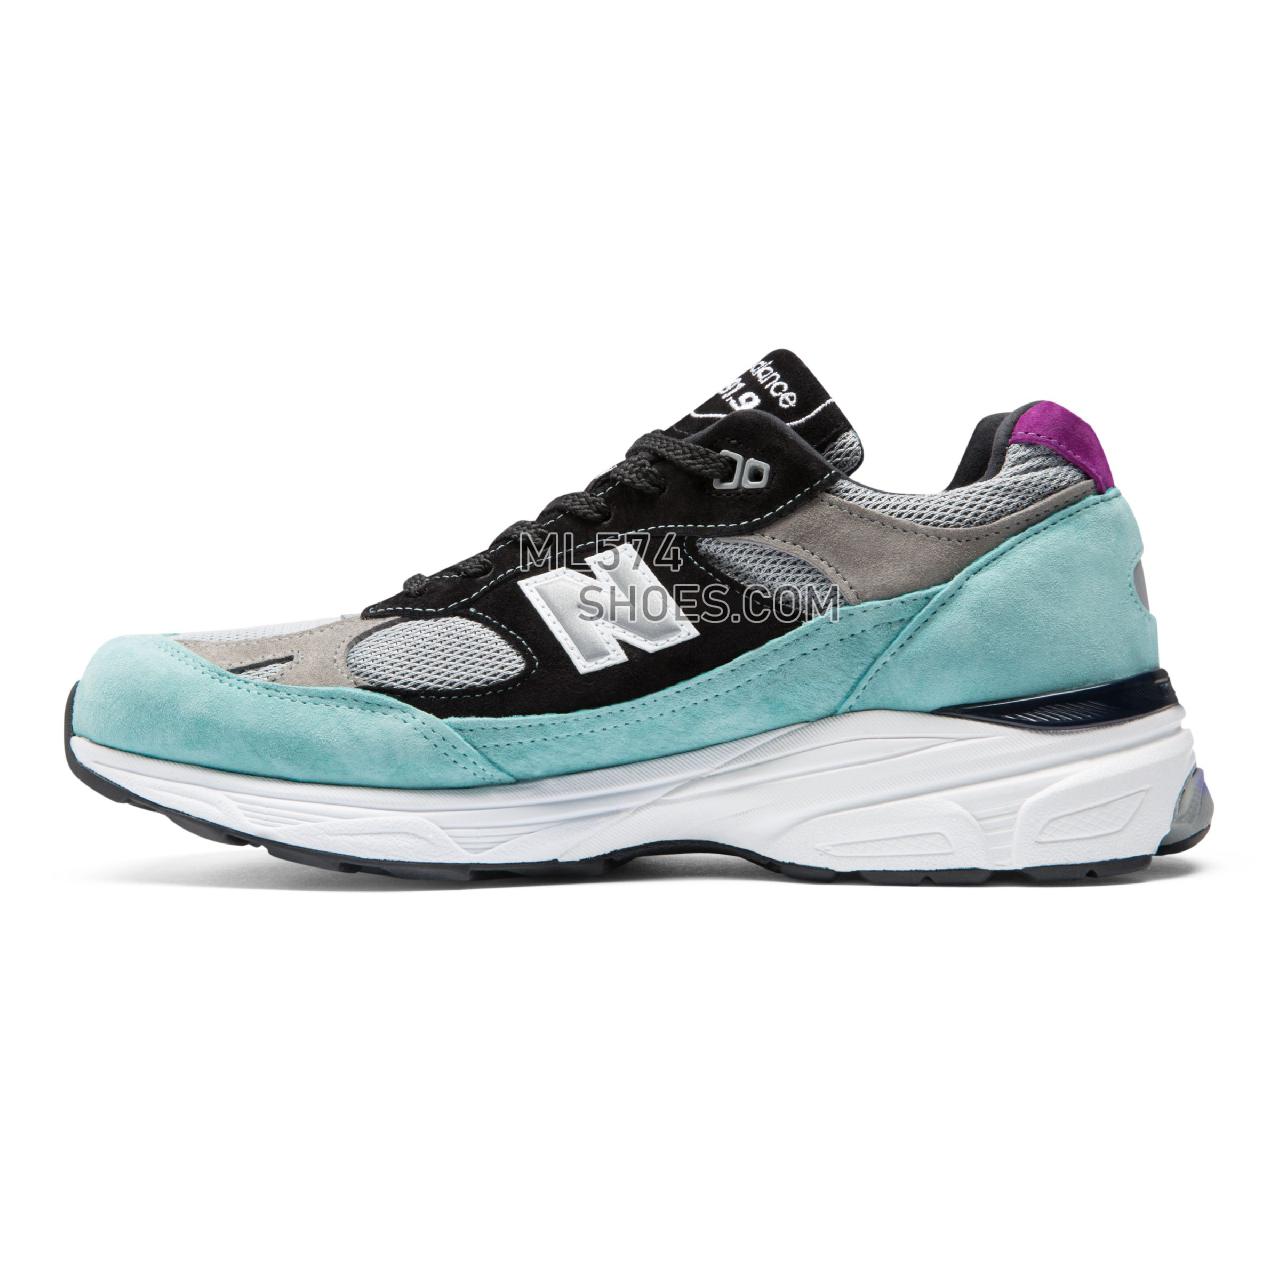 New Balance Made in UK 991.9 - Men's 991.9 Made in UK Classic M9919-PM - Light Tidepool with Grey and Black - M9919EC